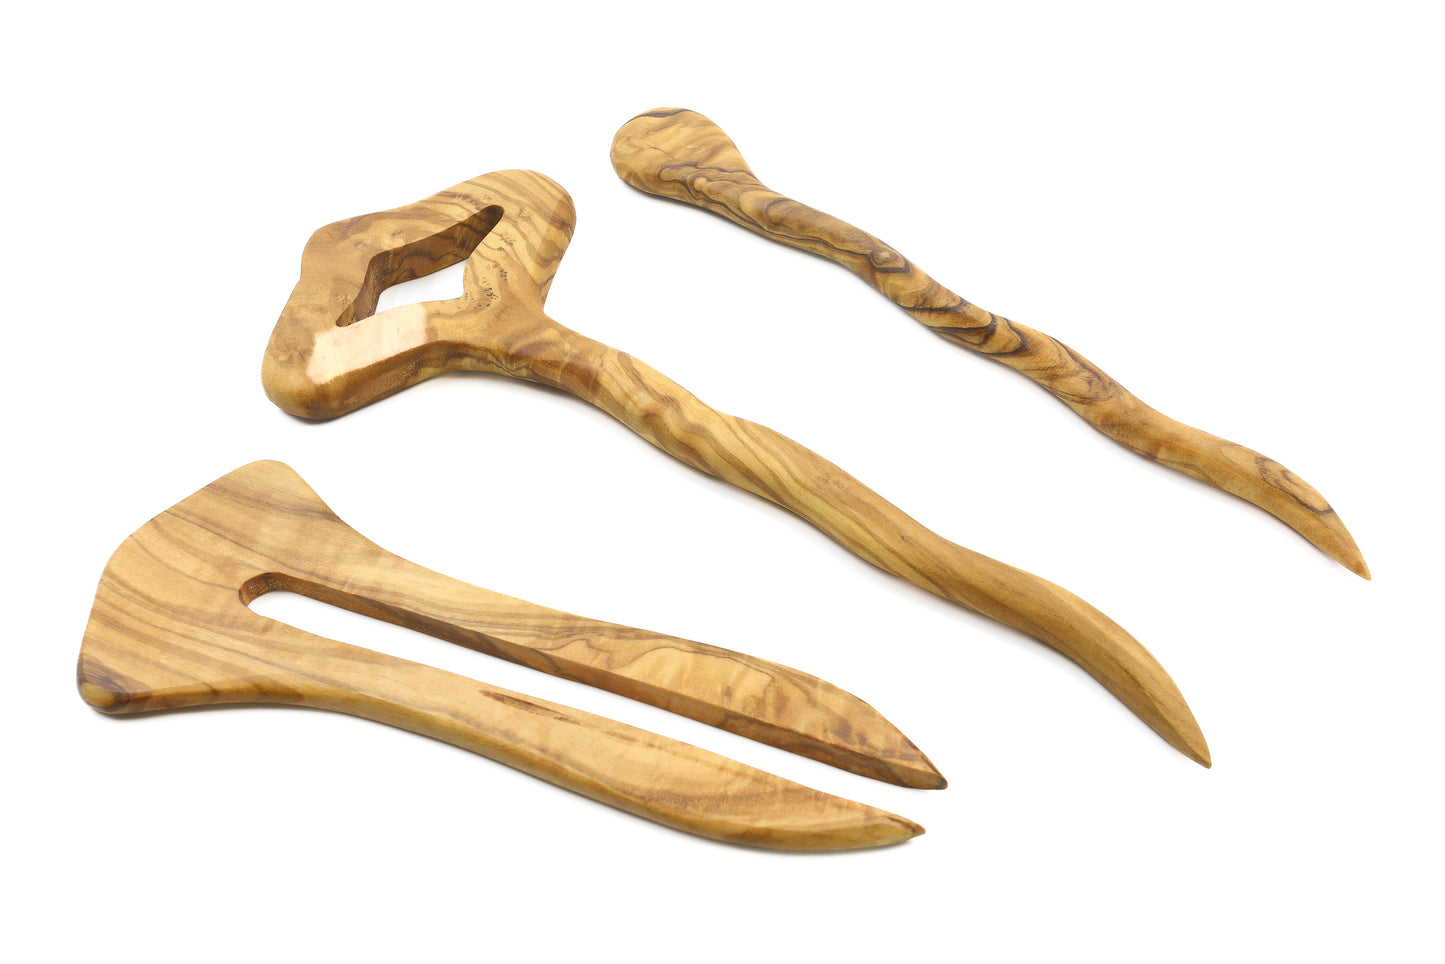 Hand-finished natural hairpin crafted from olive wood